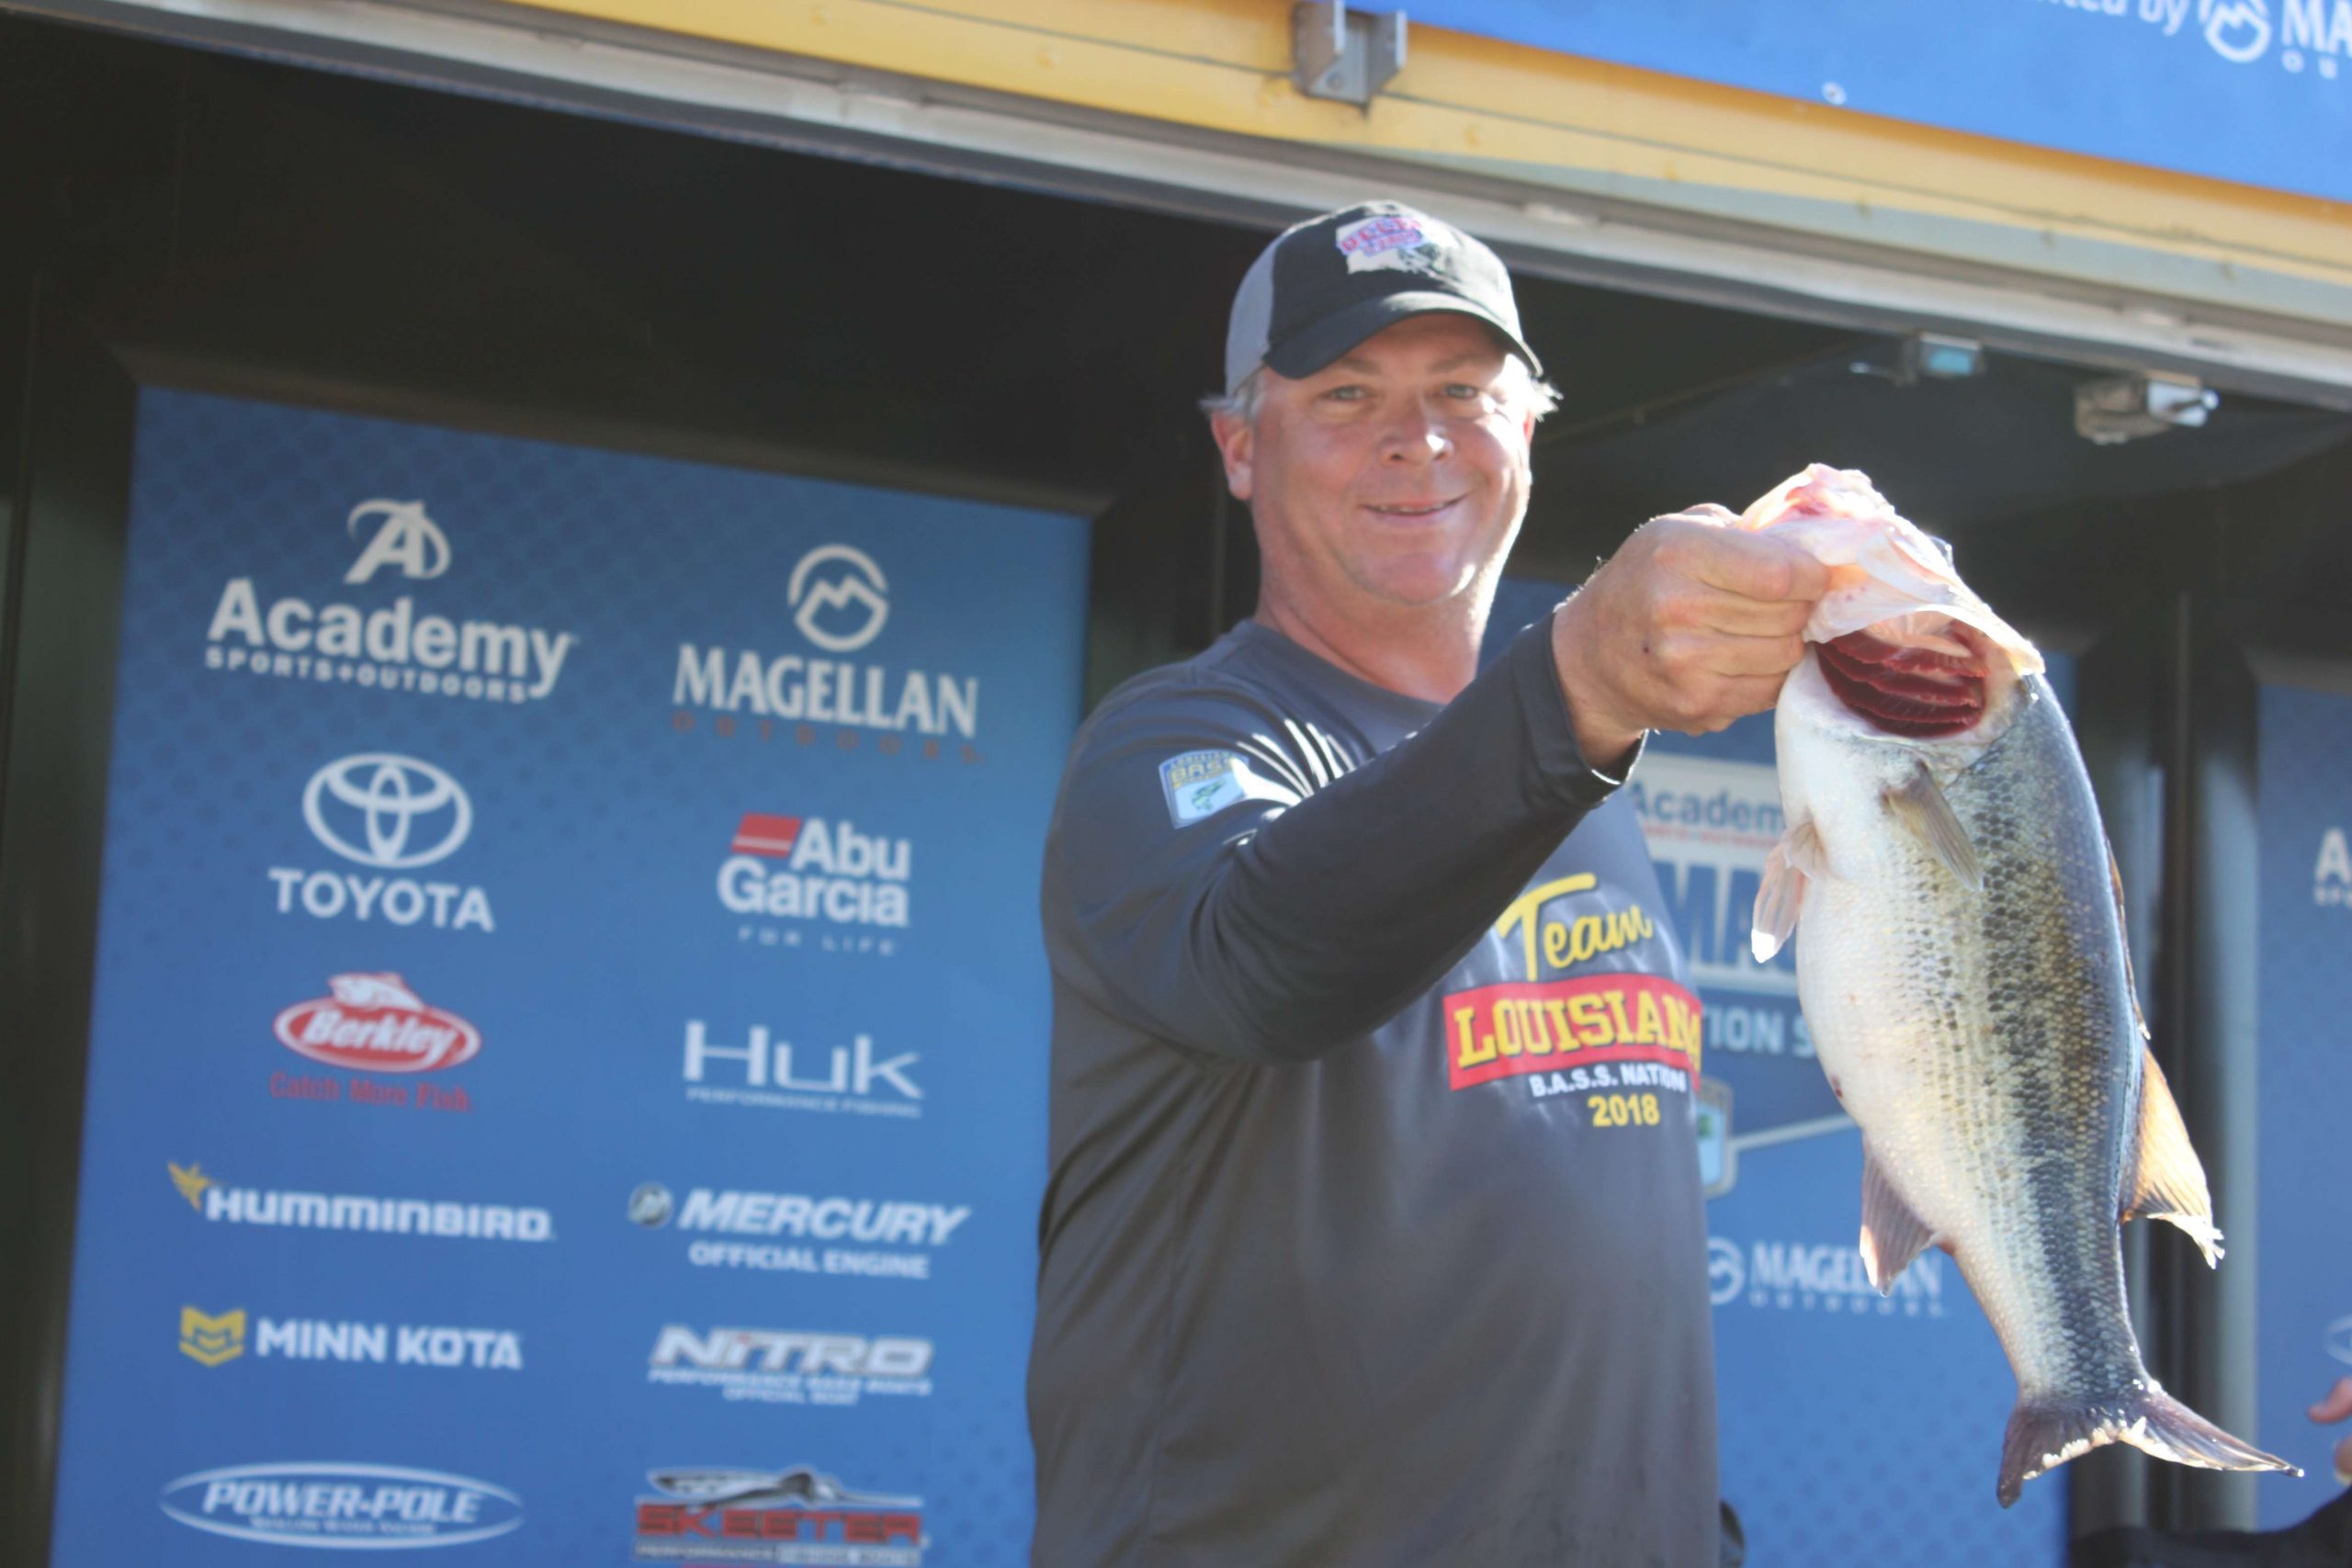 David Cavell of Team Louisiana is tied for 15th in the boater division with 16-5.